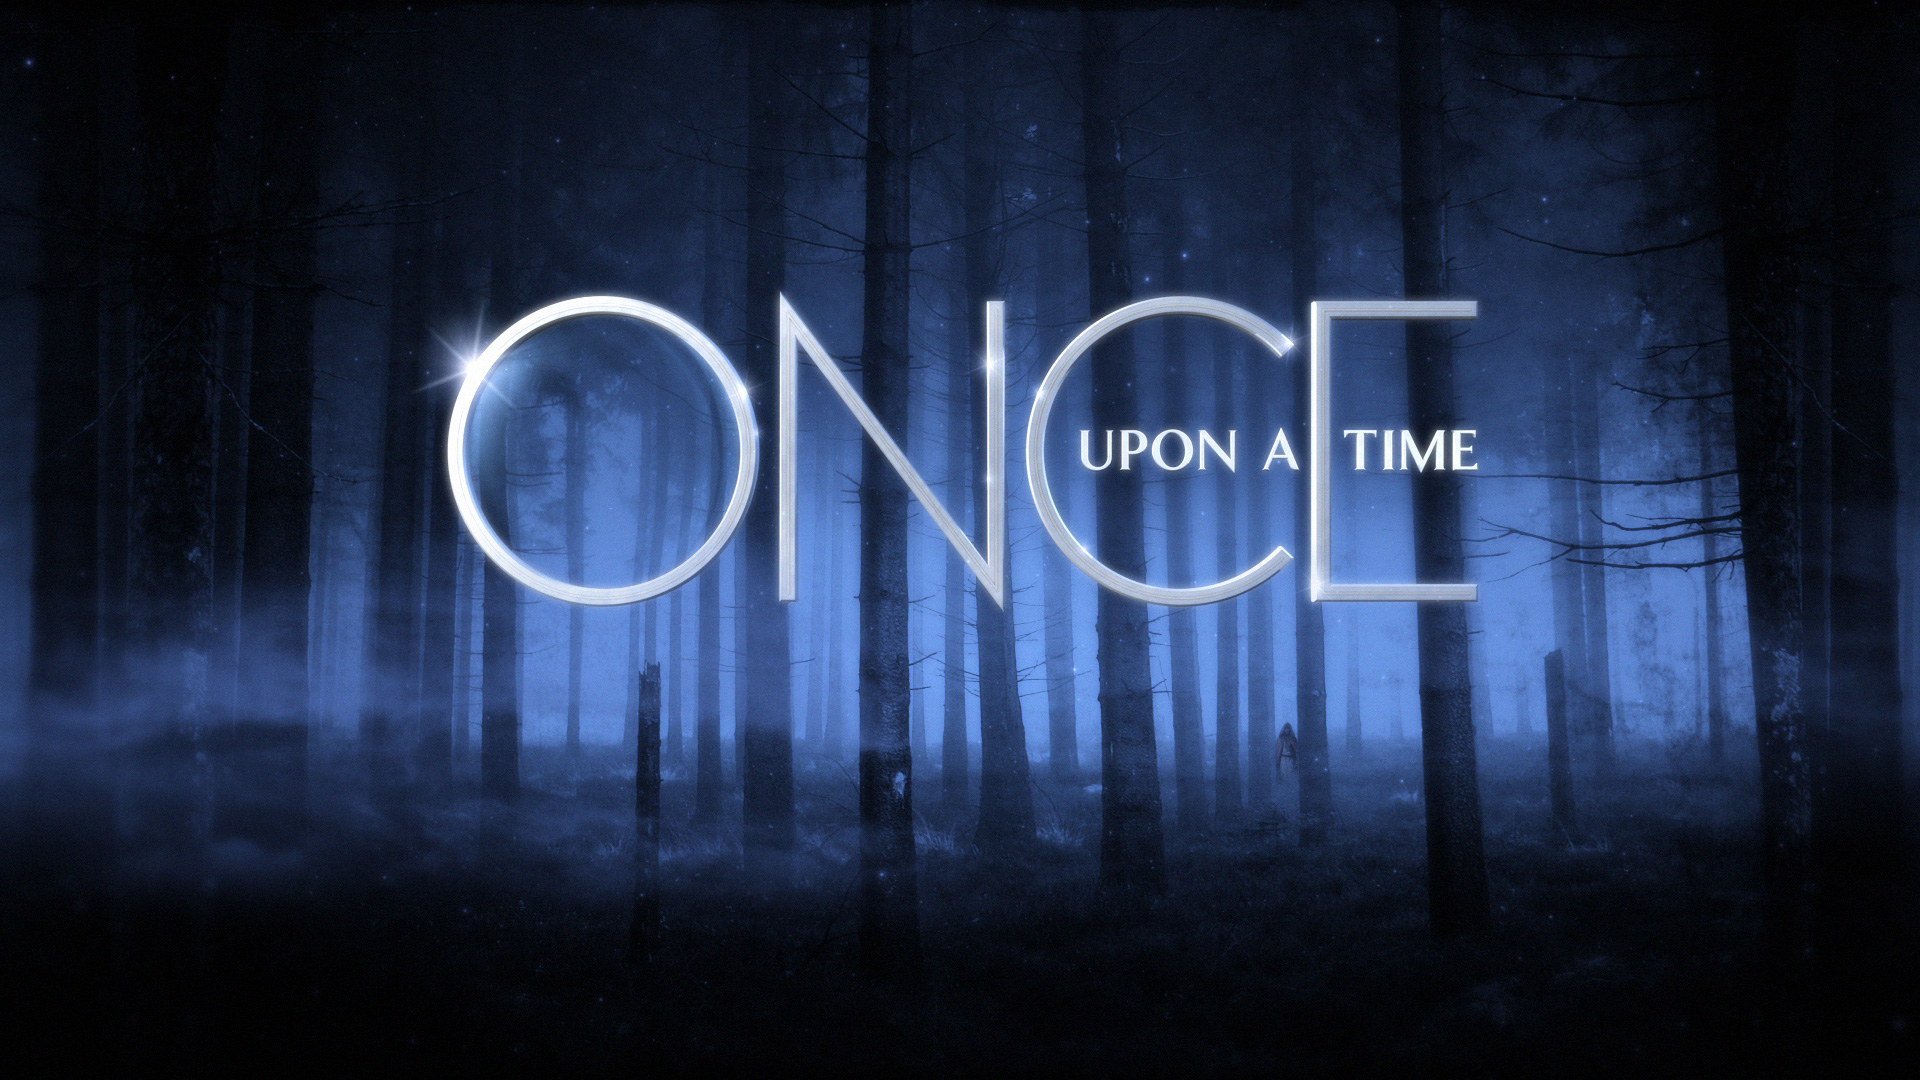 Time a once upon